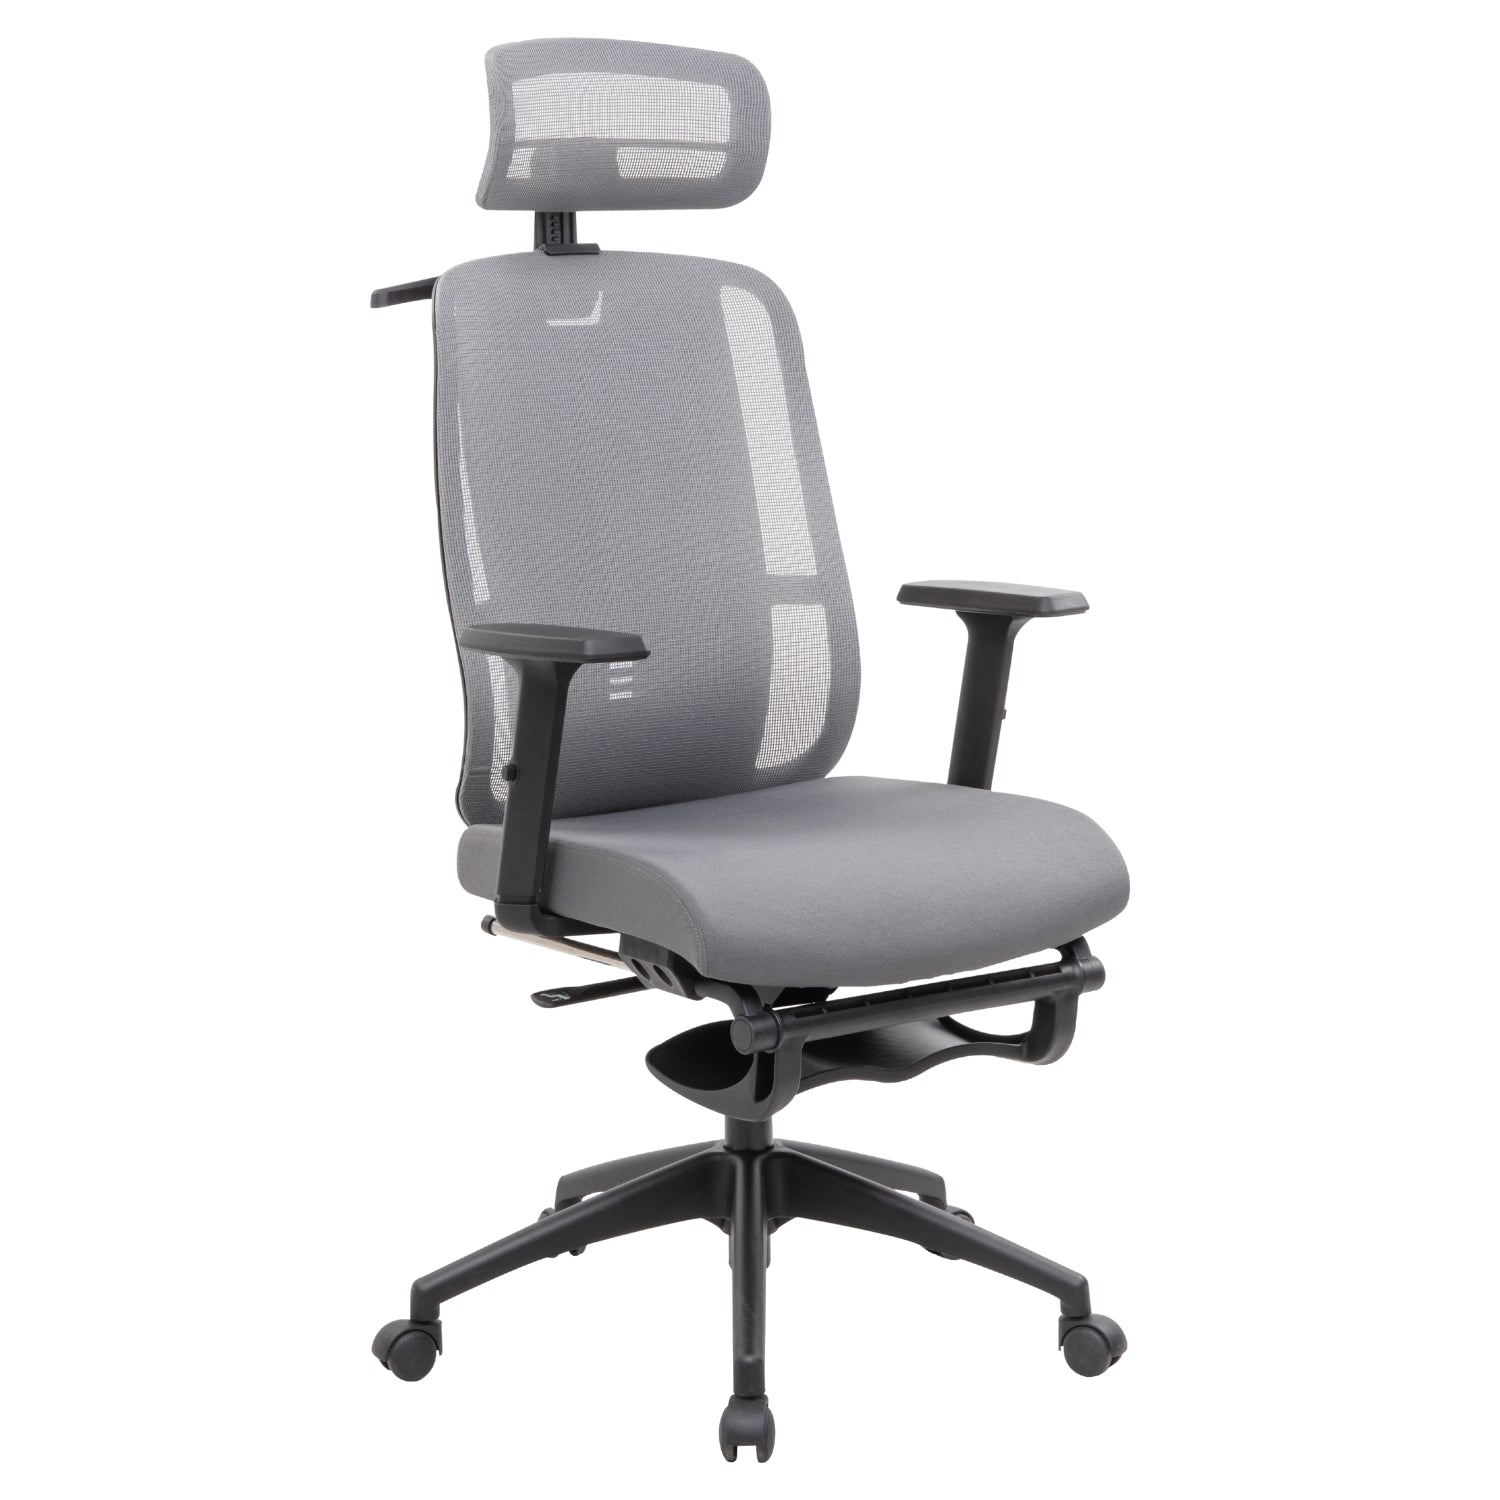 Kyona mesh grey office chair with armrest and footrest.